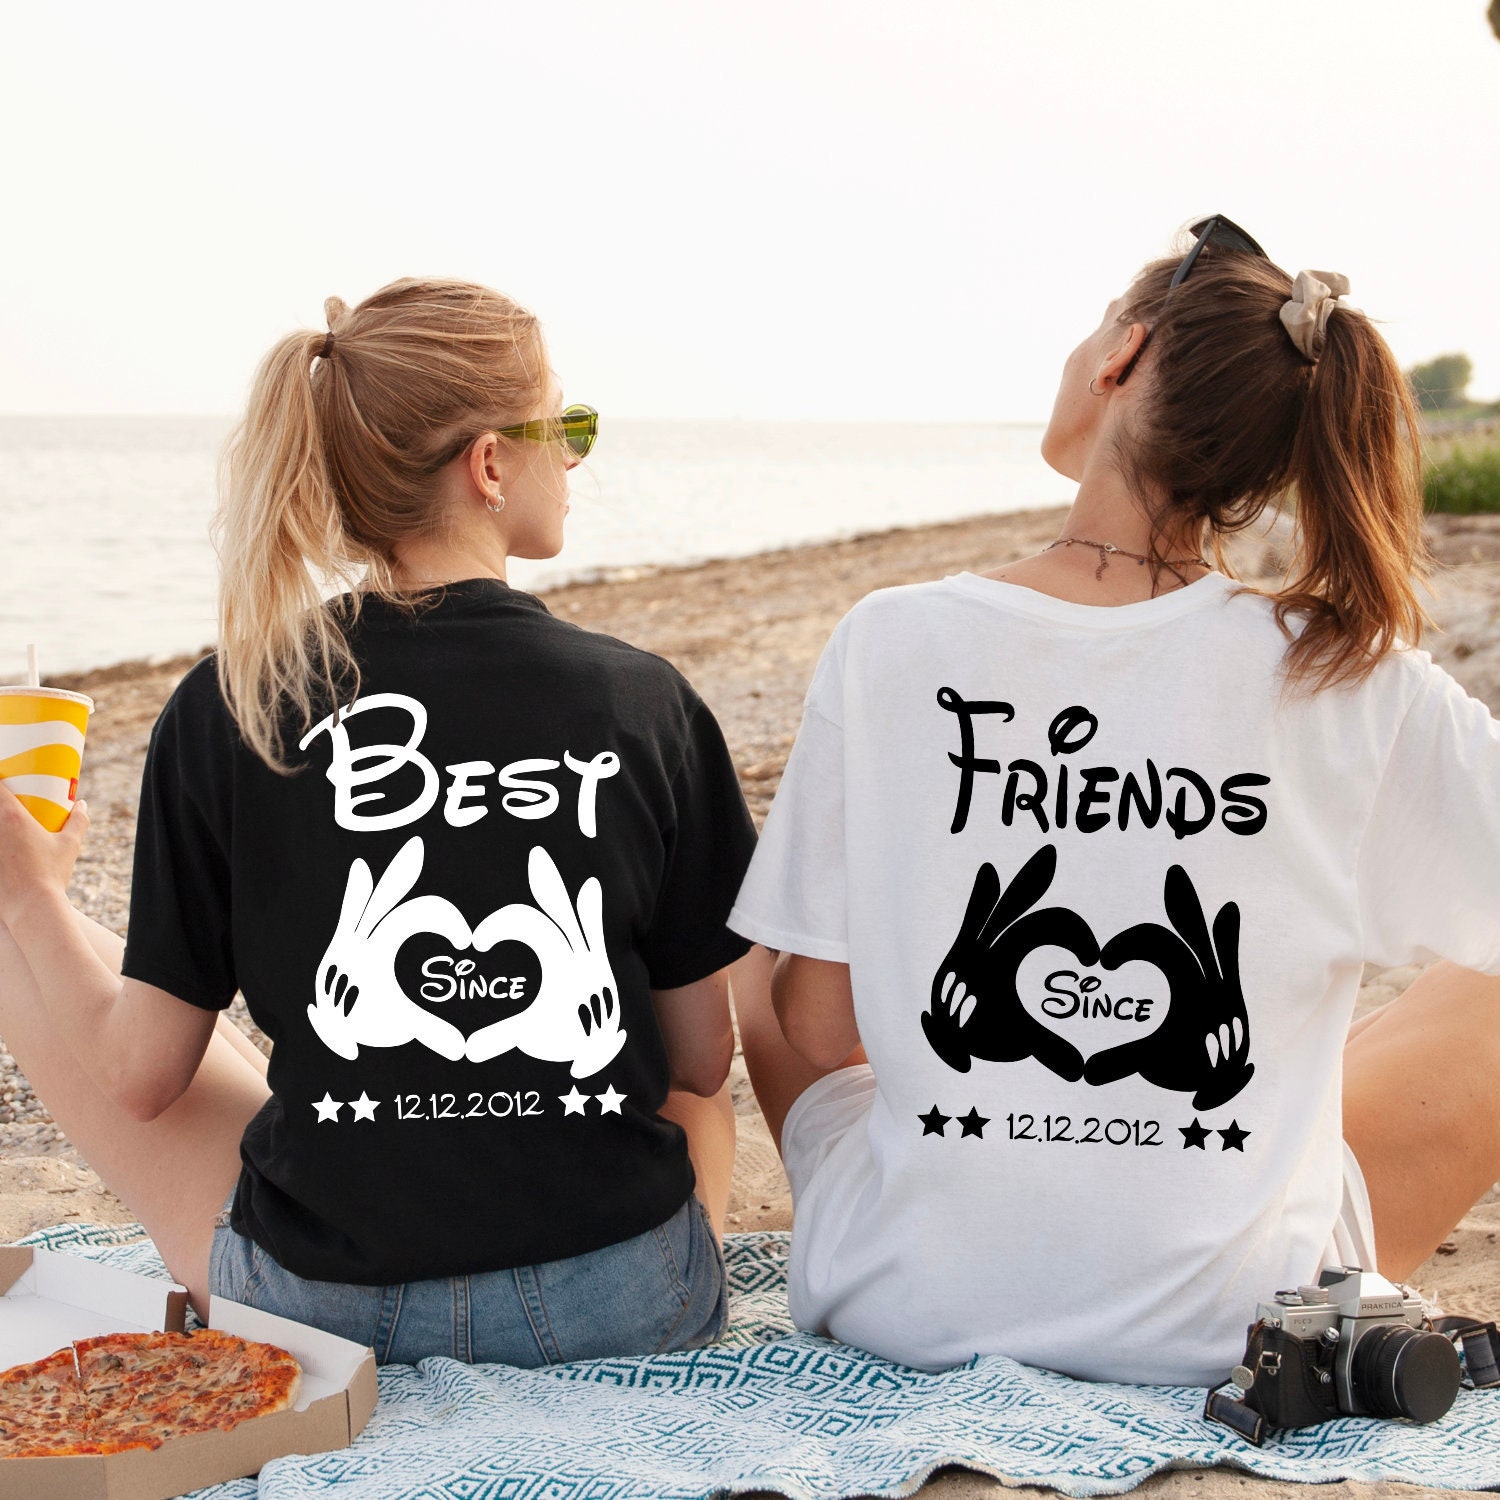 T-shirts in T-shirts Date Love for Friends a Friendship - With Best 3XL SET Couple XS BFF Couple Shirts Shirts Etsy Best Friends Desired